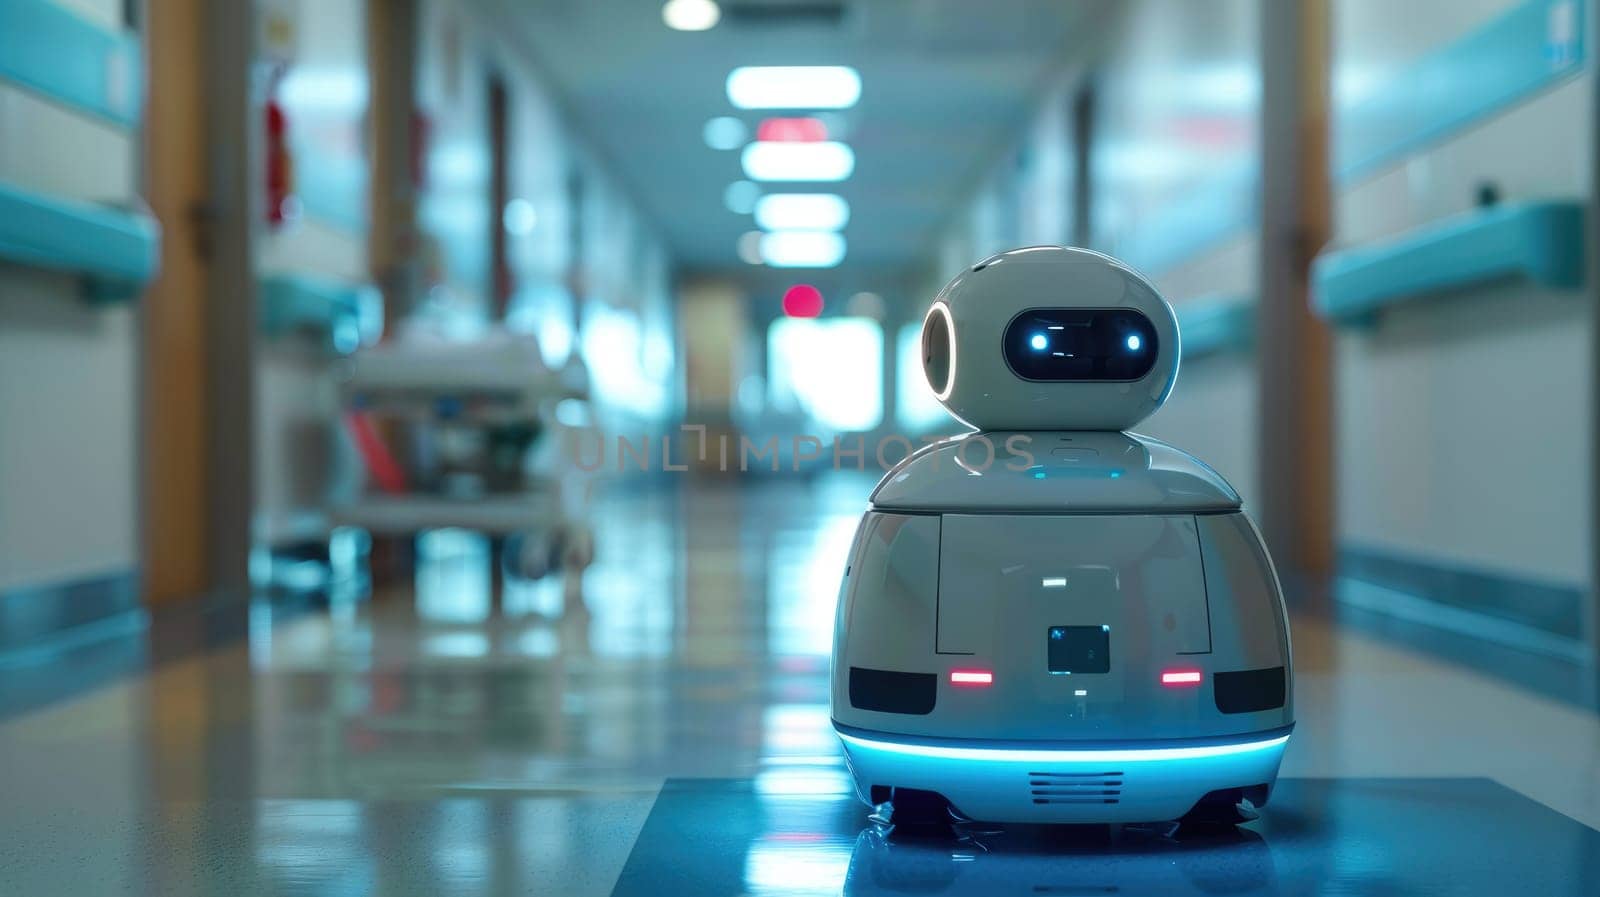 A healthcare robot in a modern hospital corrido, Automation for improved patient care by nijieimu